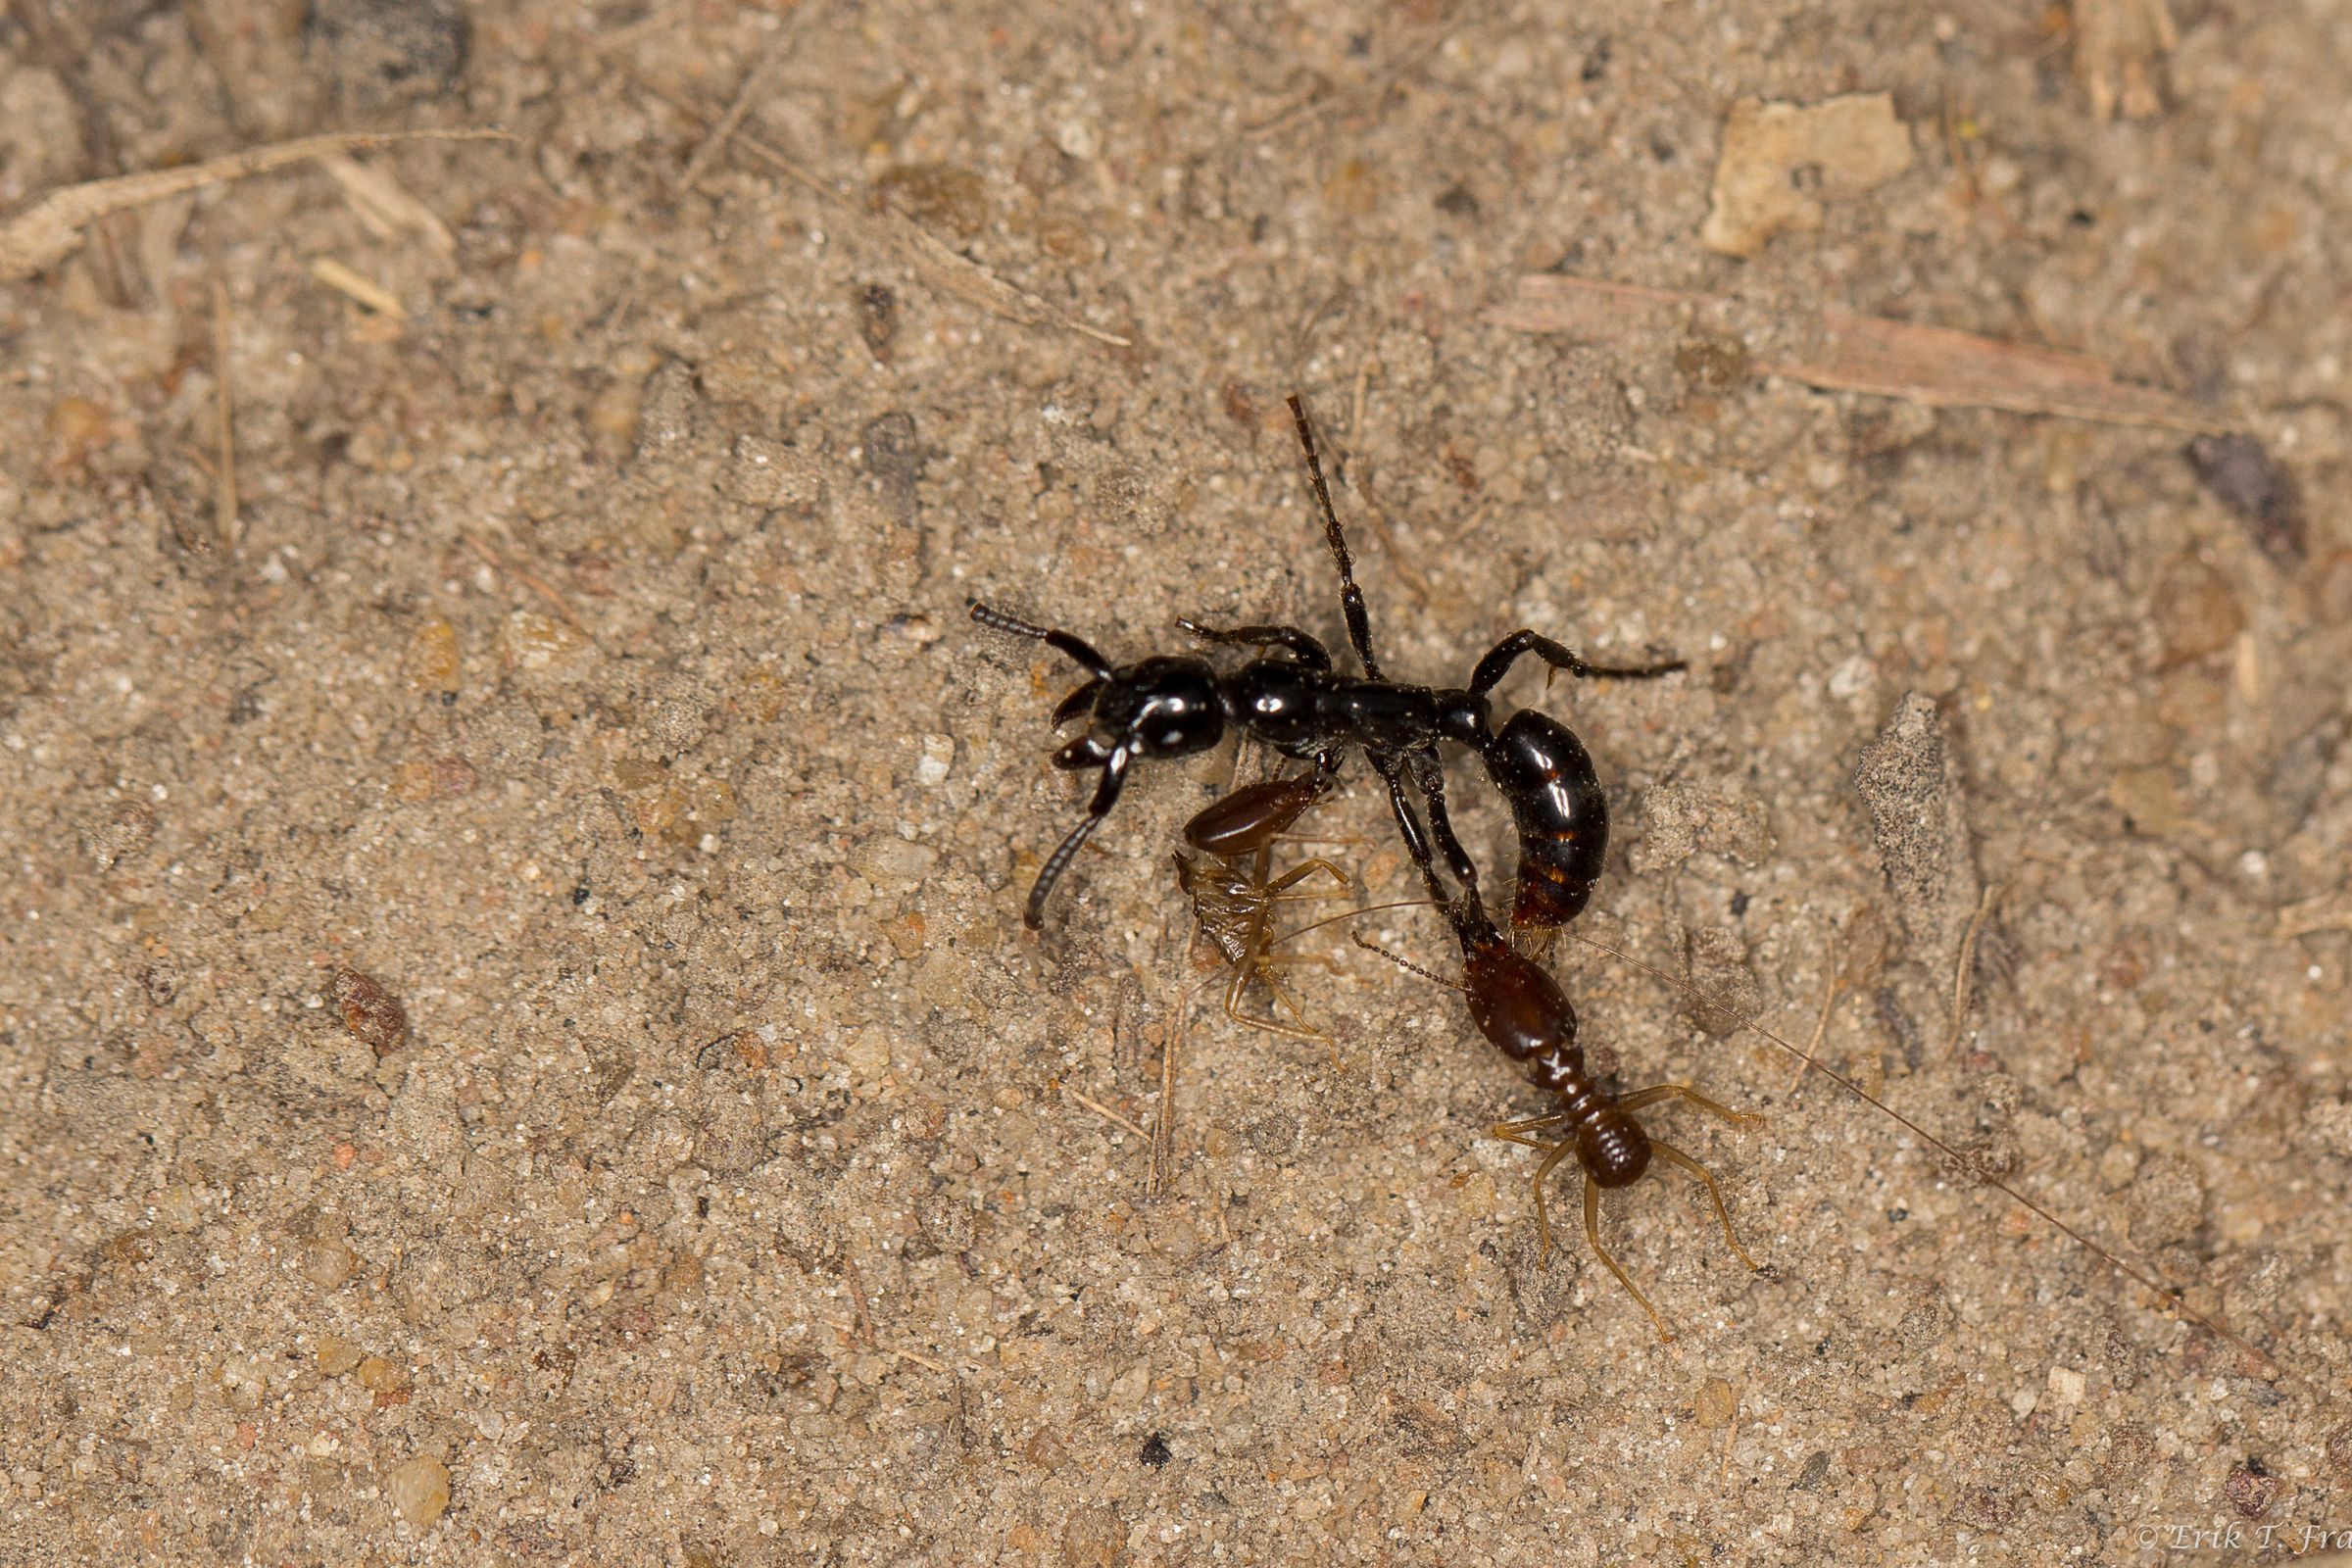 A Megaponera analis ant, with two termites clinging to it, had to stop moving because of exhaustion while going back to the nest.